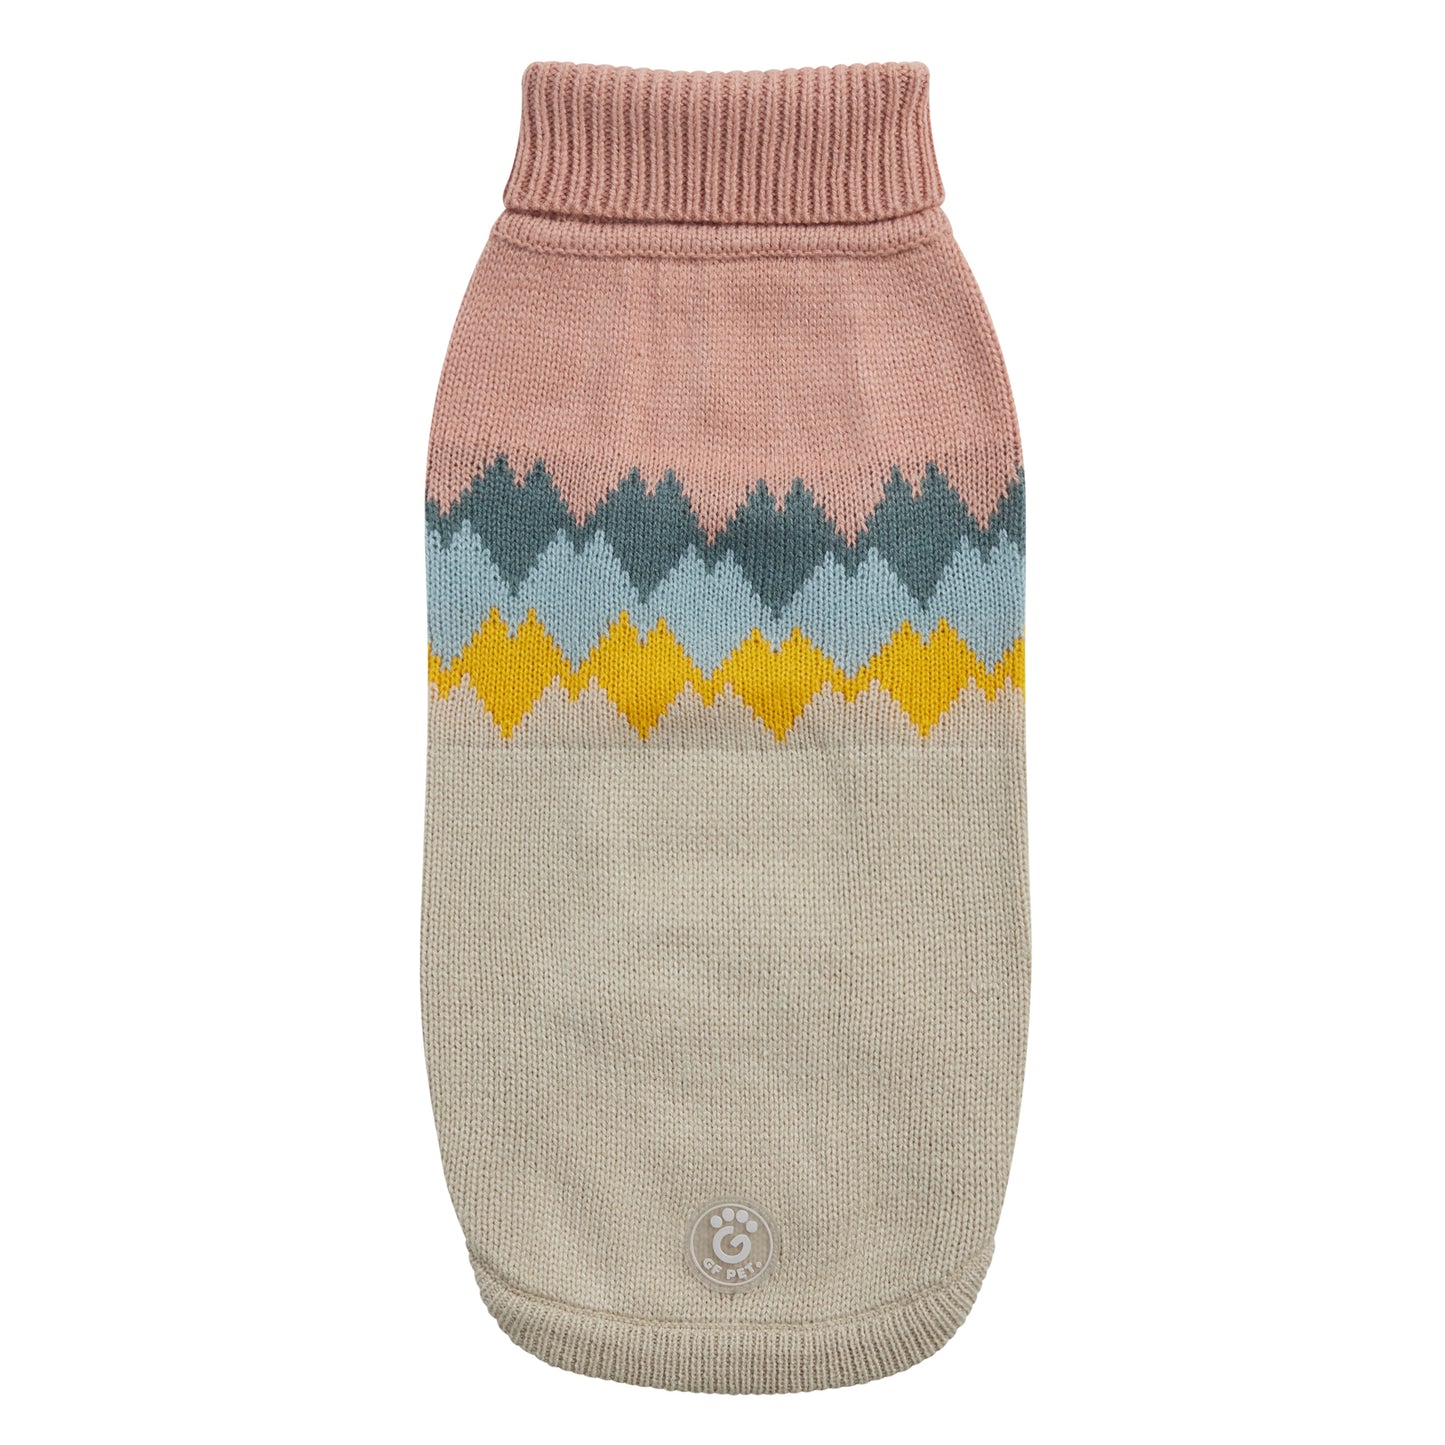 a beige and pink dog sweater with colorful mountain peaks graphic